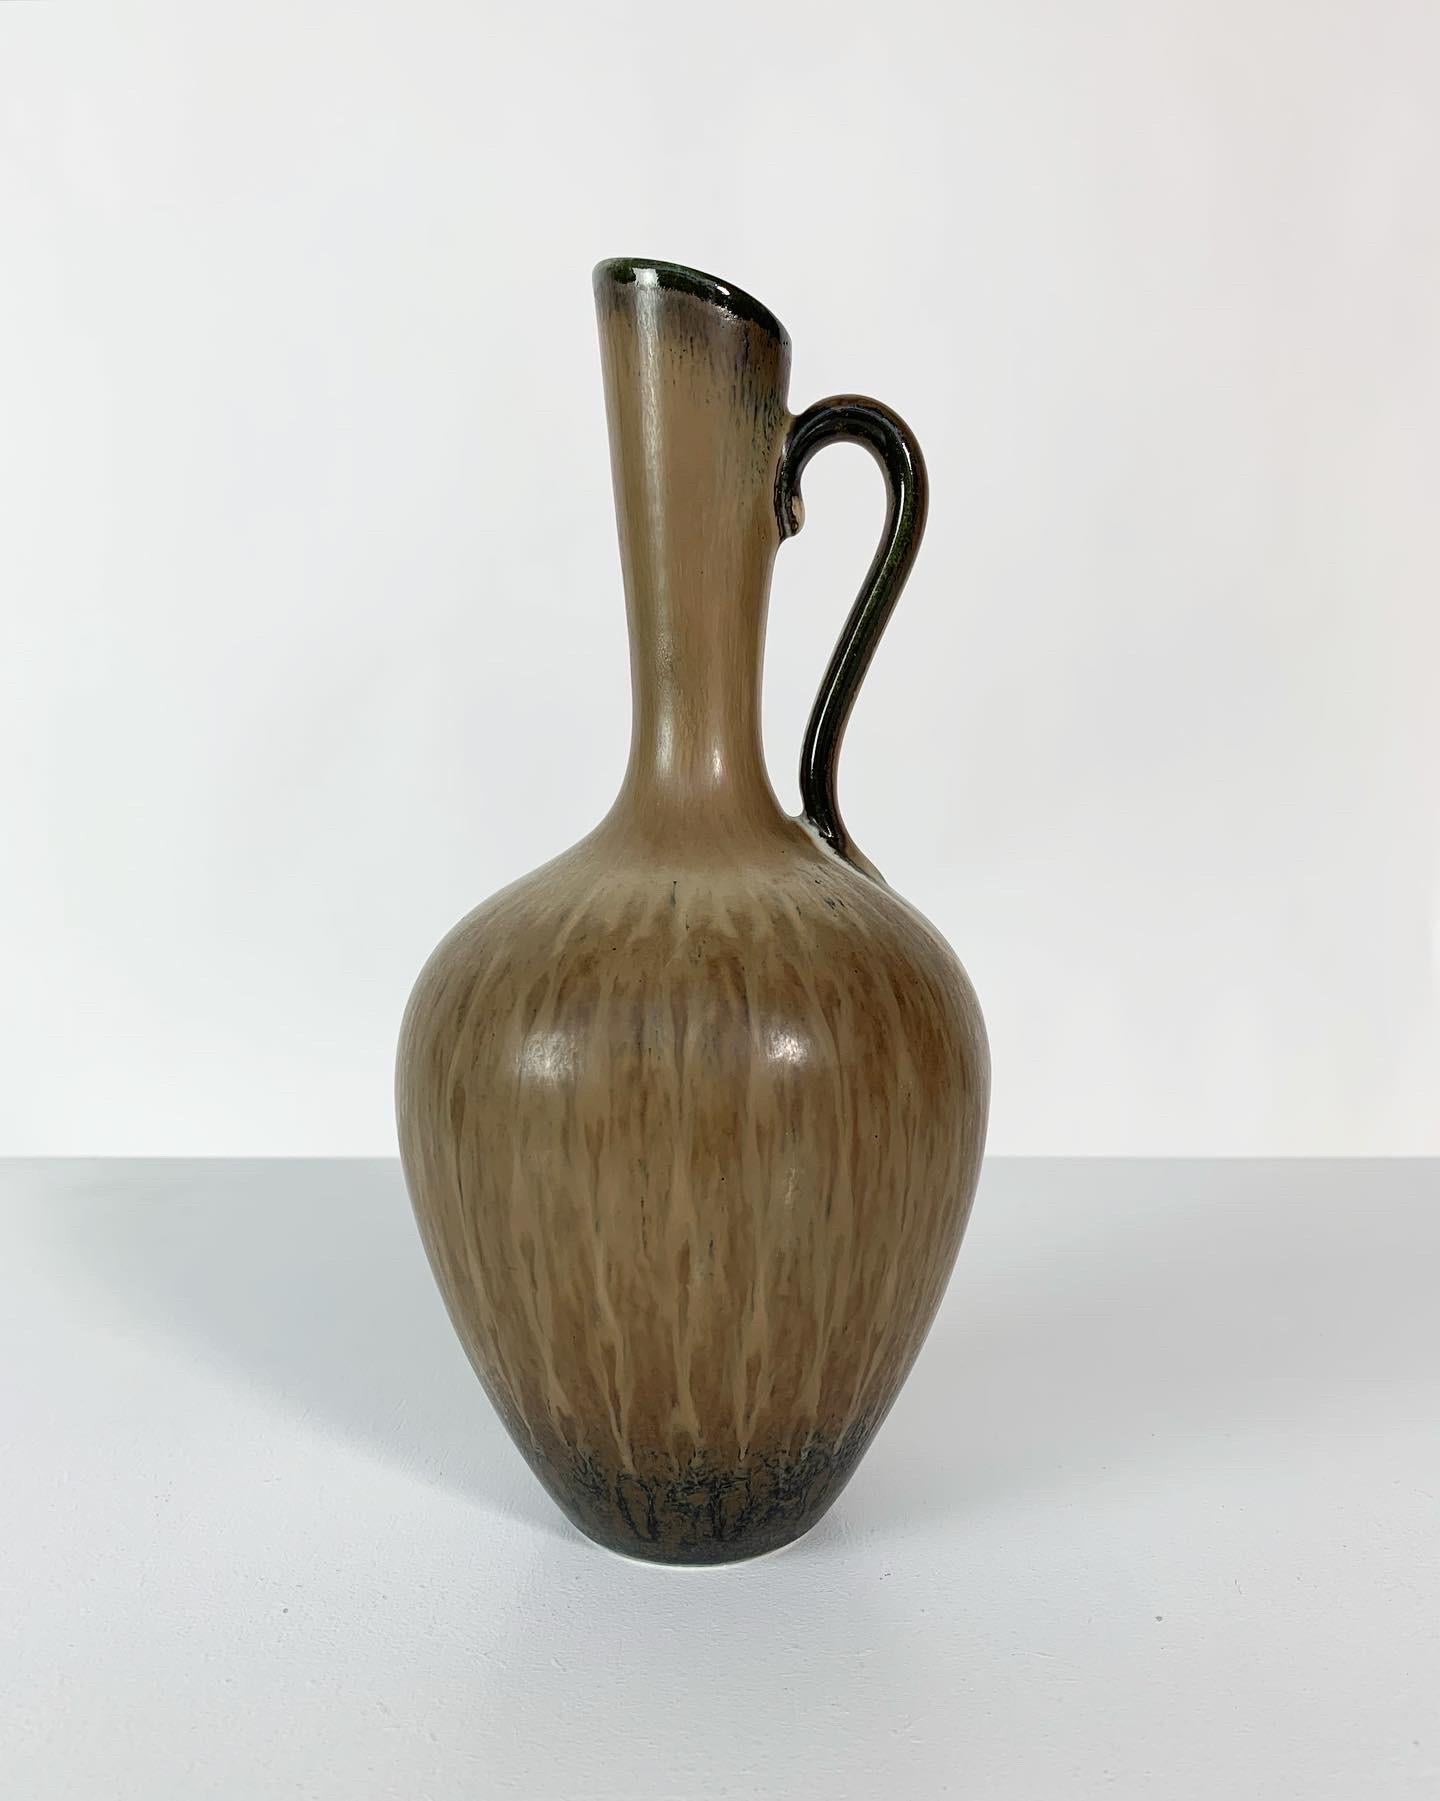 Gunnar Nylund stoneware vase, model AUQ in hues of brown, beige and black. Hand-crafted in the 1950s in Sweden for Rörstrand factory. First class quality sorting.

Height: 23.5 cm
Diameter: 10 cm.